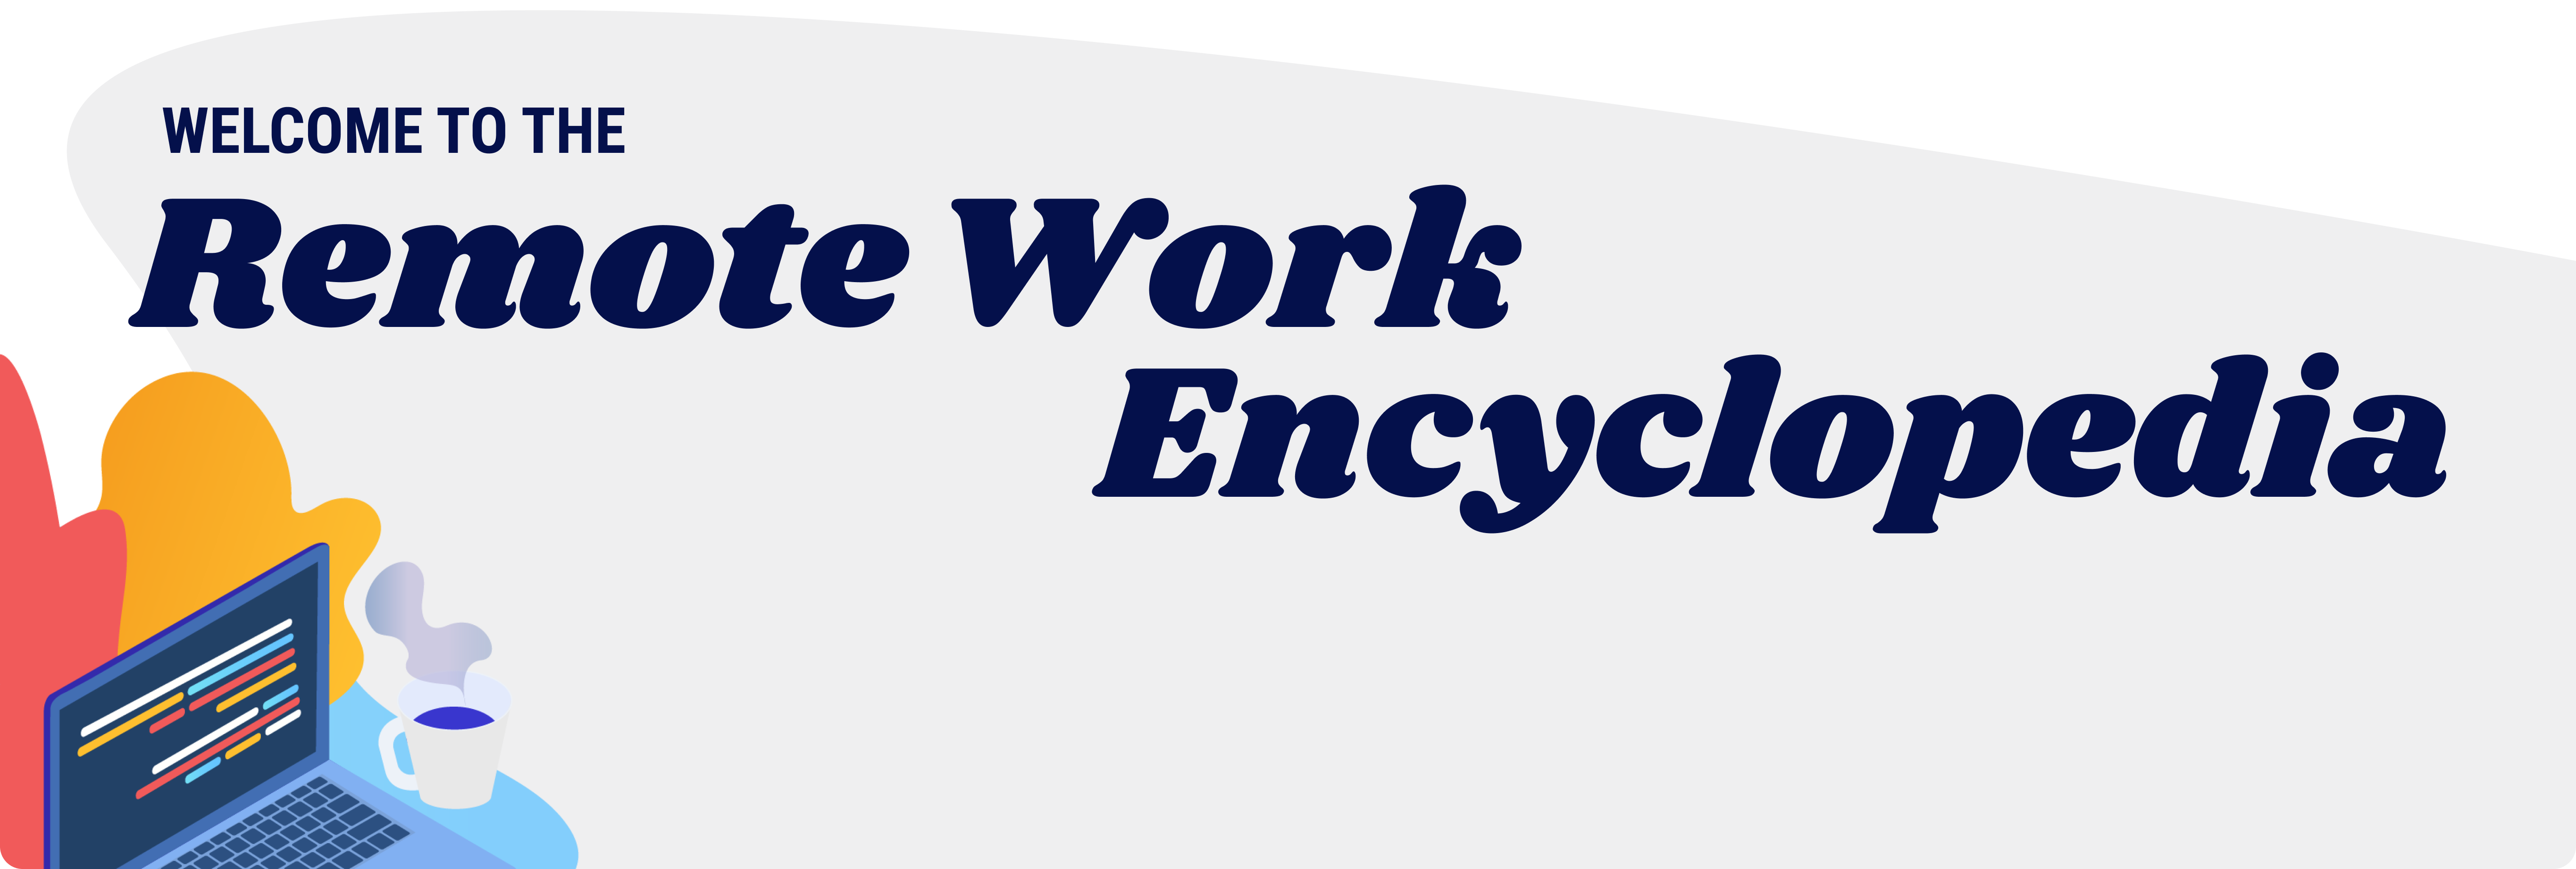 Welcome to the Remote Work Encyclopedia, written by and for the moonlightwork.com community